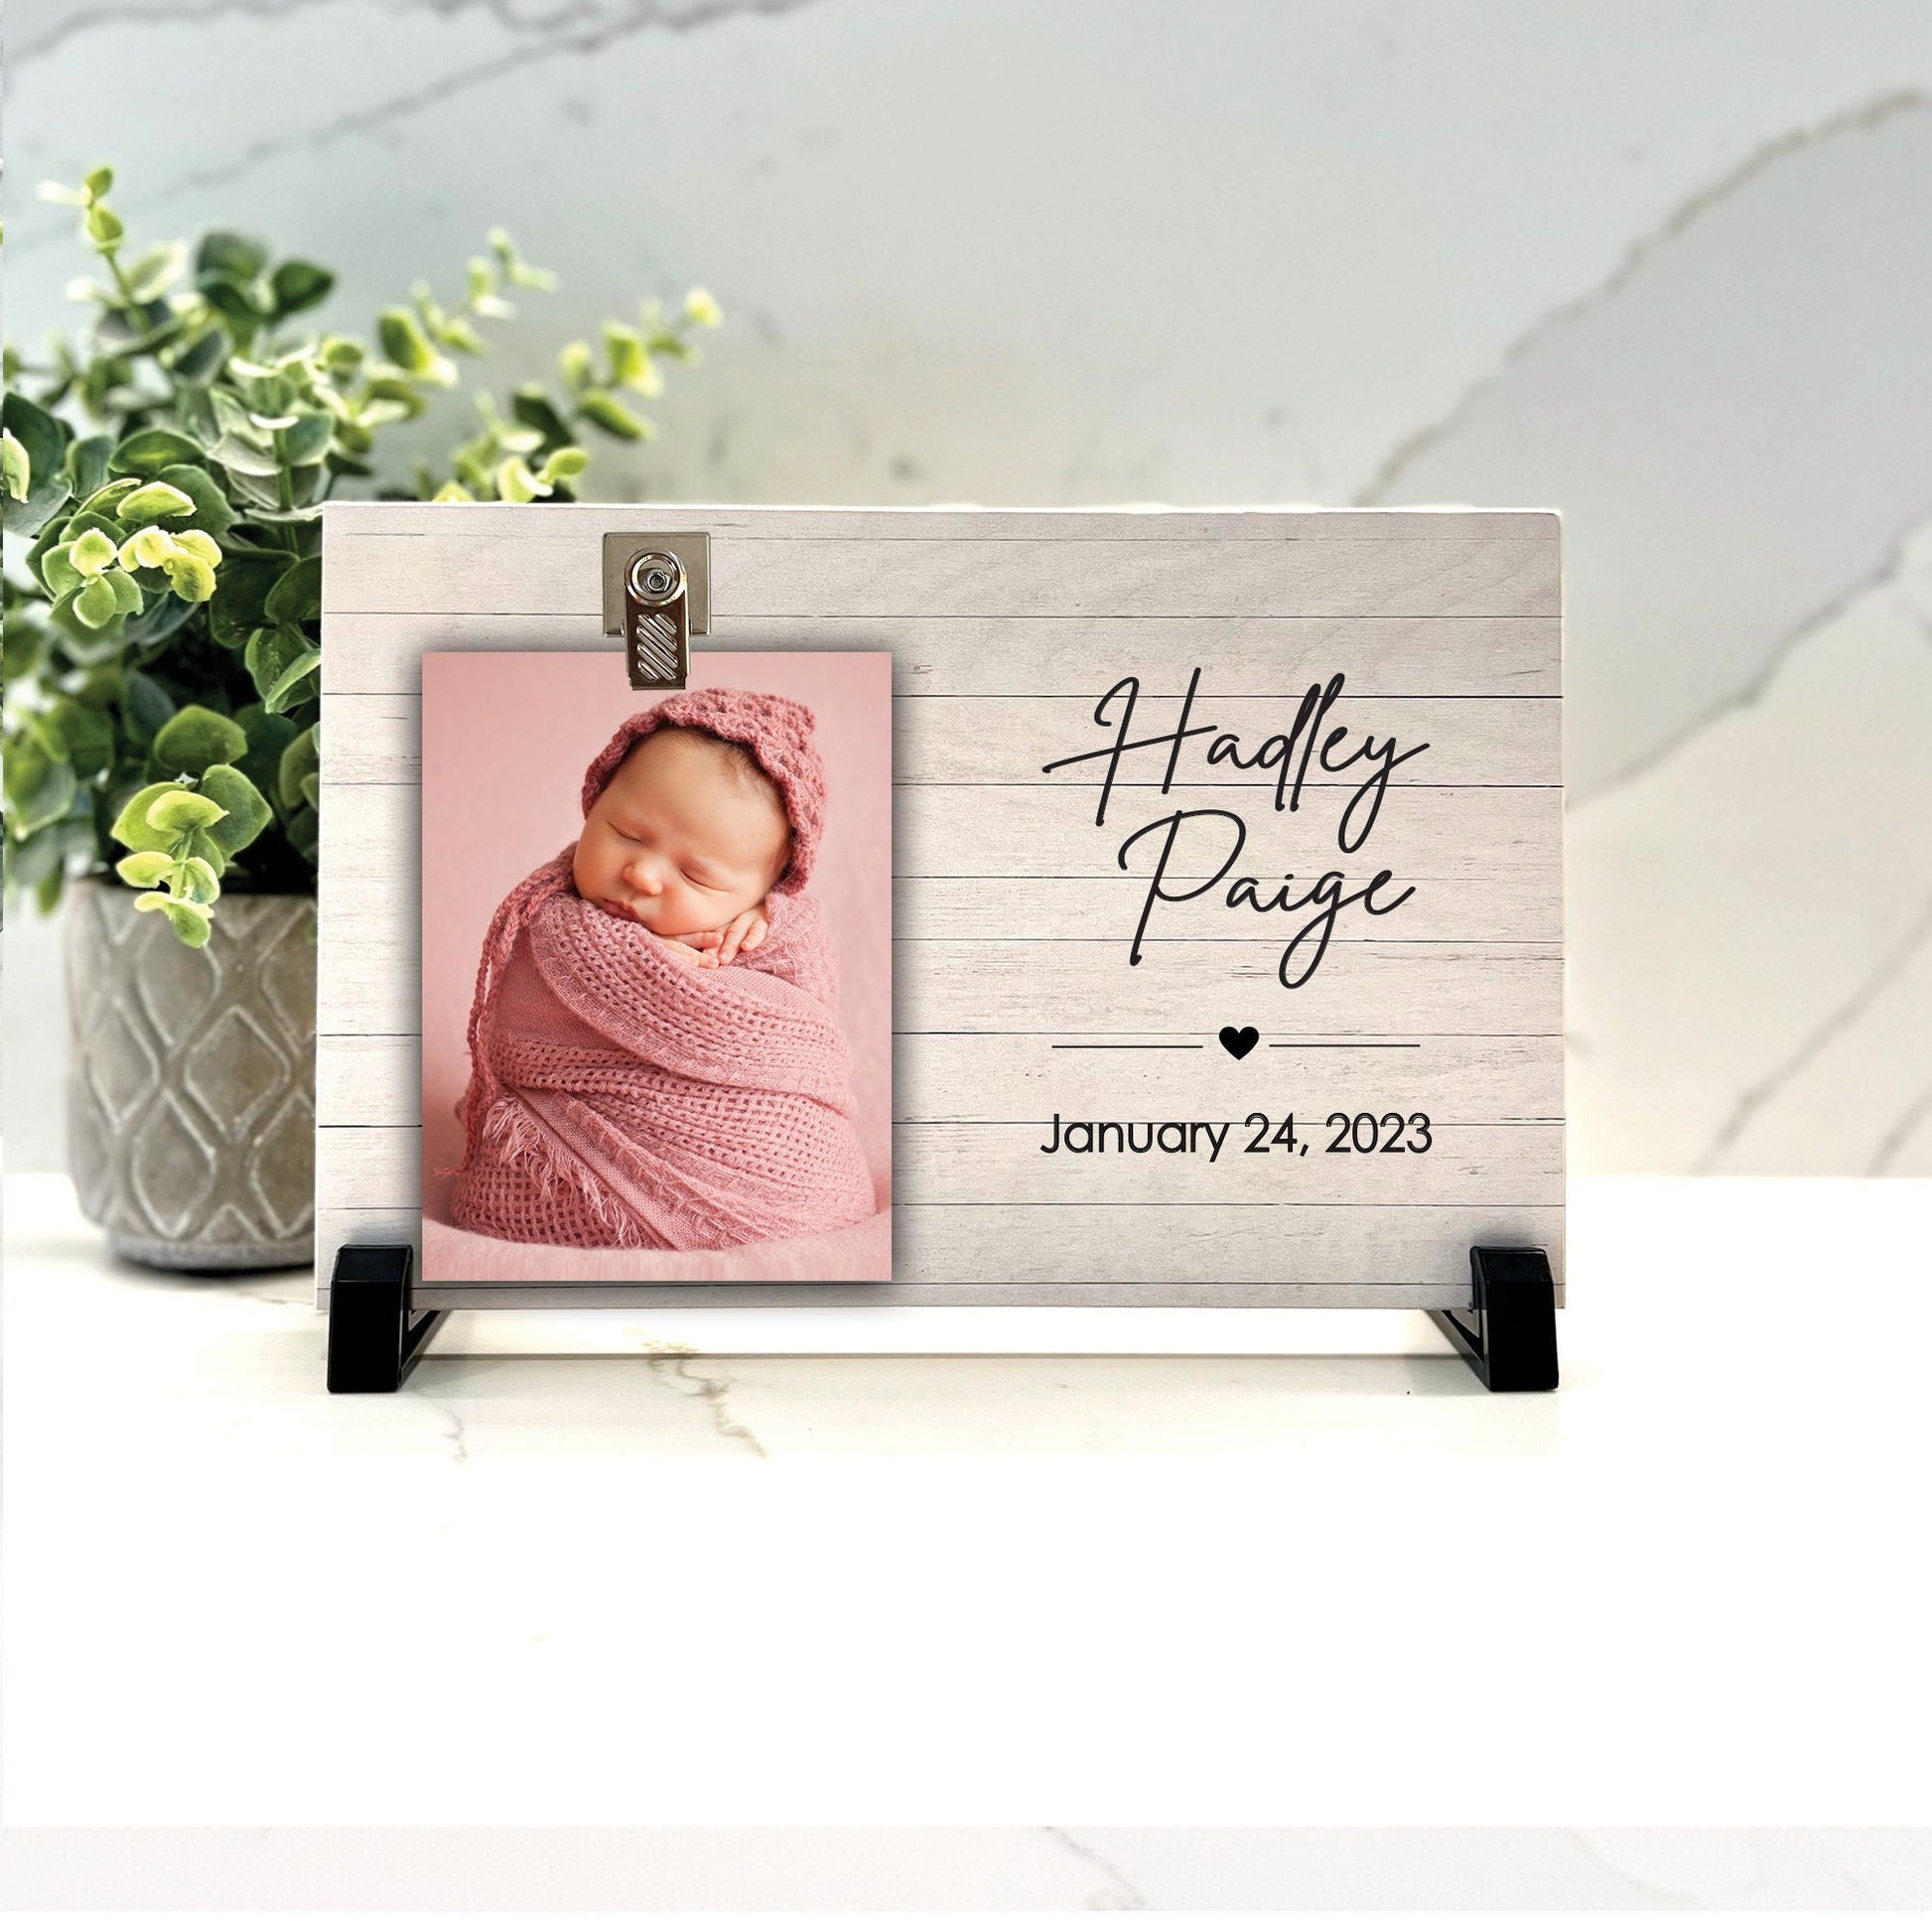 Custom baby frame personalized with name and birth date, Personalized Baby Gift, Gift Ideas for baby, New Mom gift, new baby gift